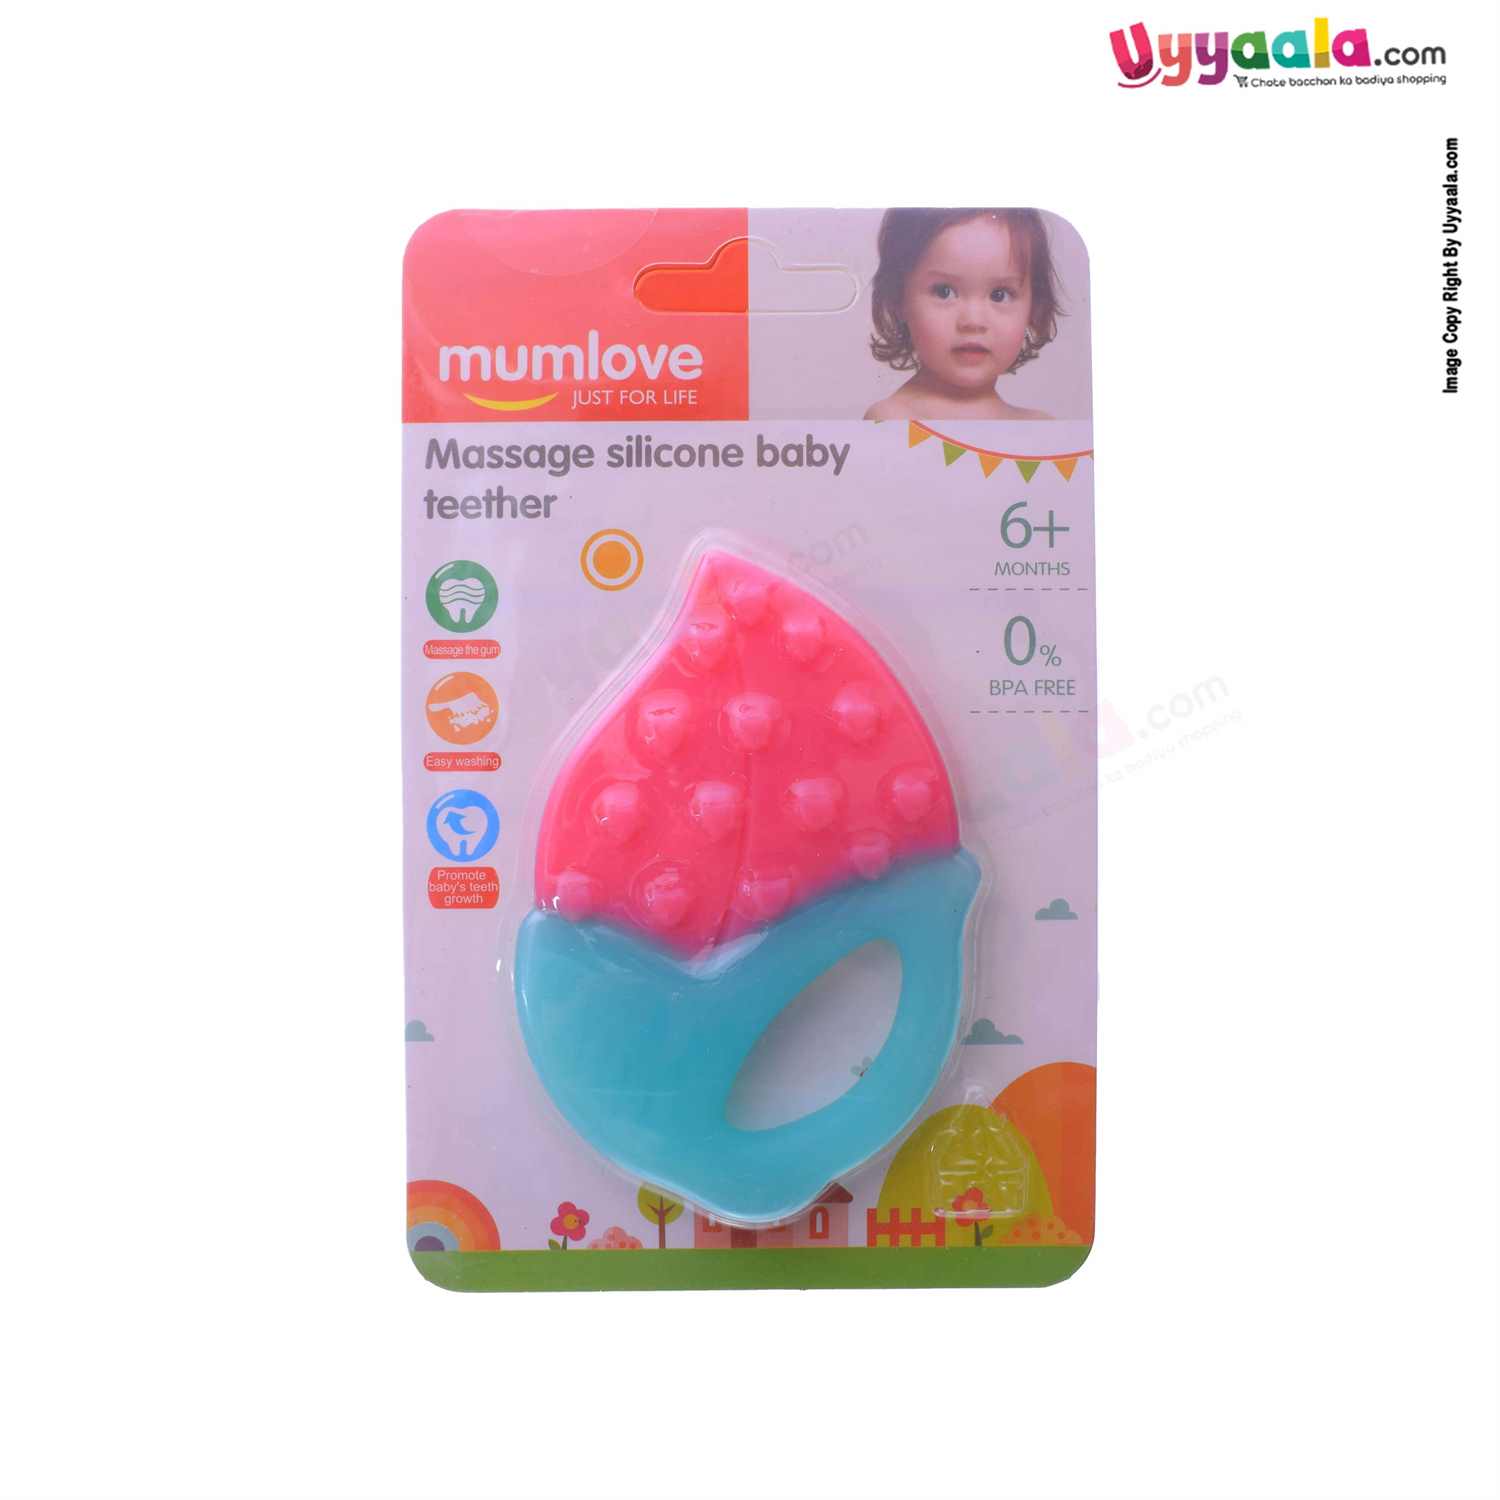 MUMLOVE Massage Silicone Baby Teether 6+m Age - Pink, Green